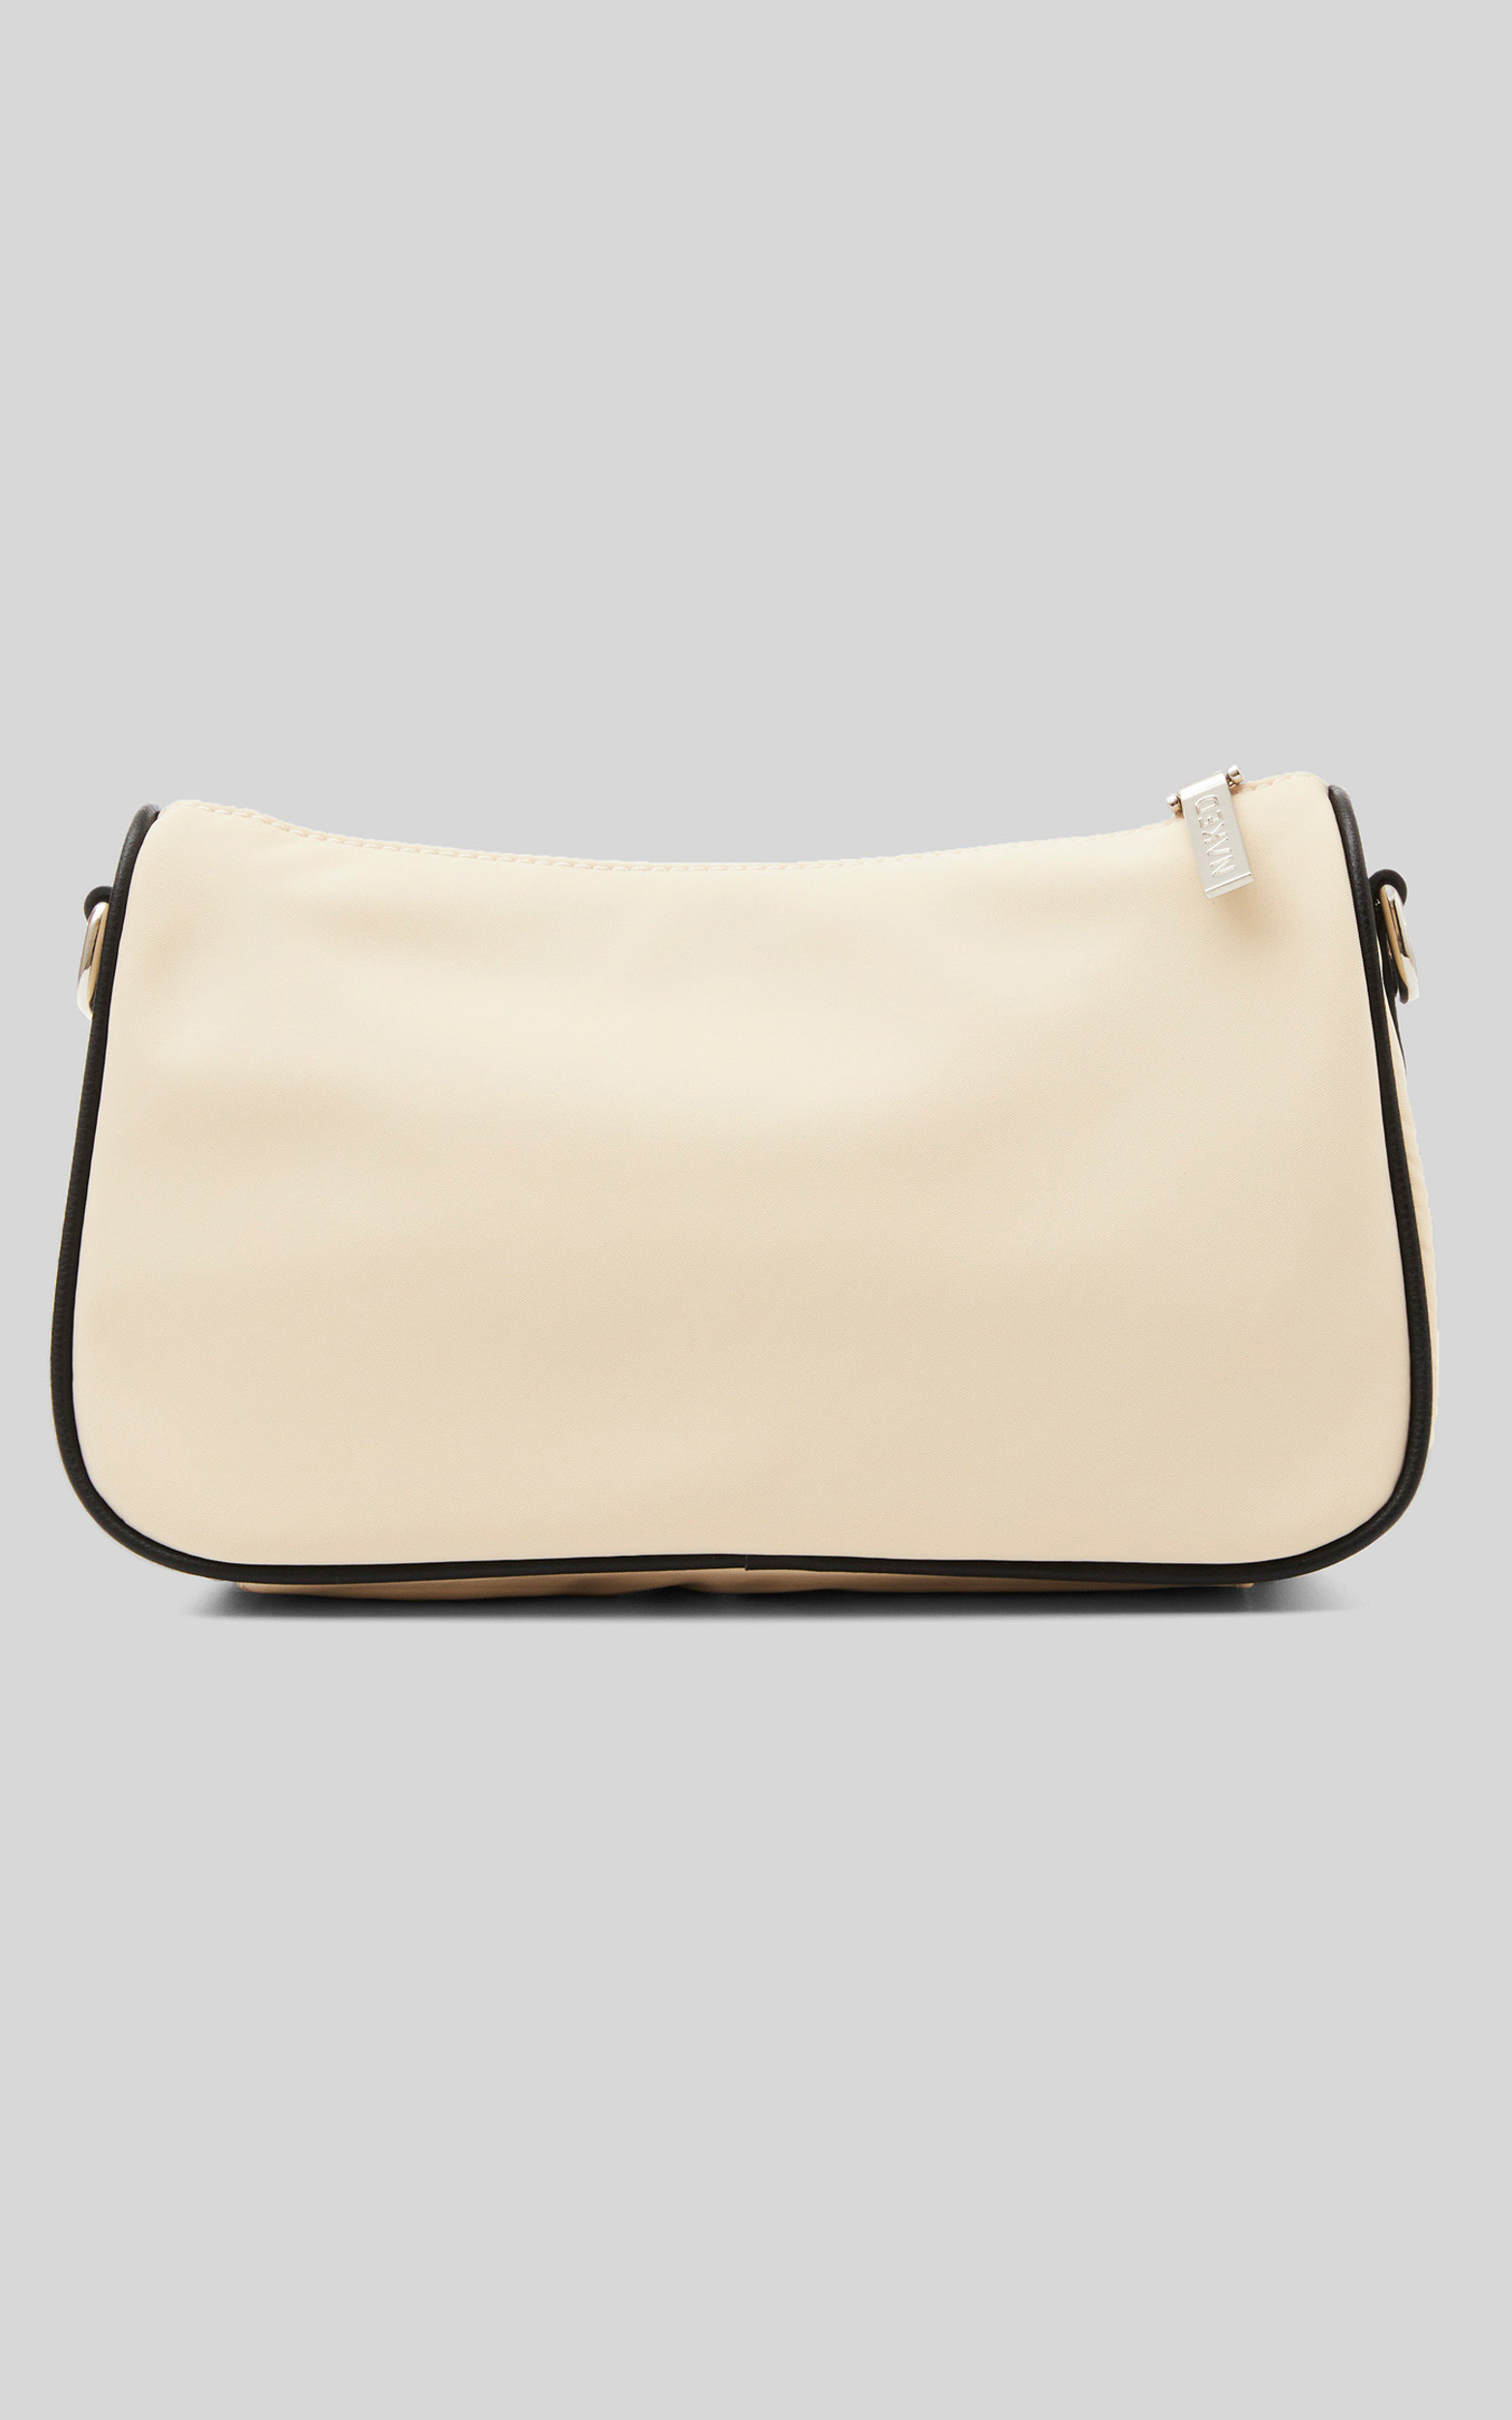 Nakedvice - The Hunter Nylon Bag in Ivory - NoSize, WHT1, hi-res image number null